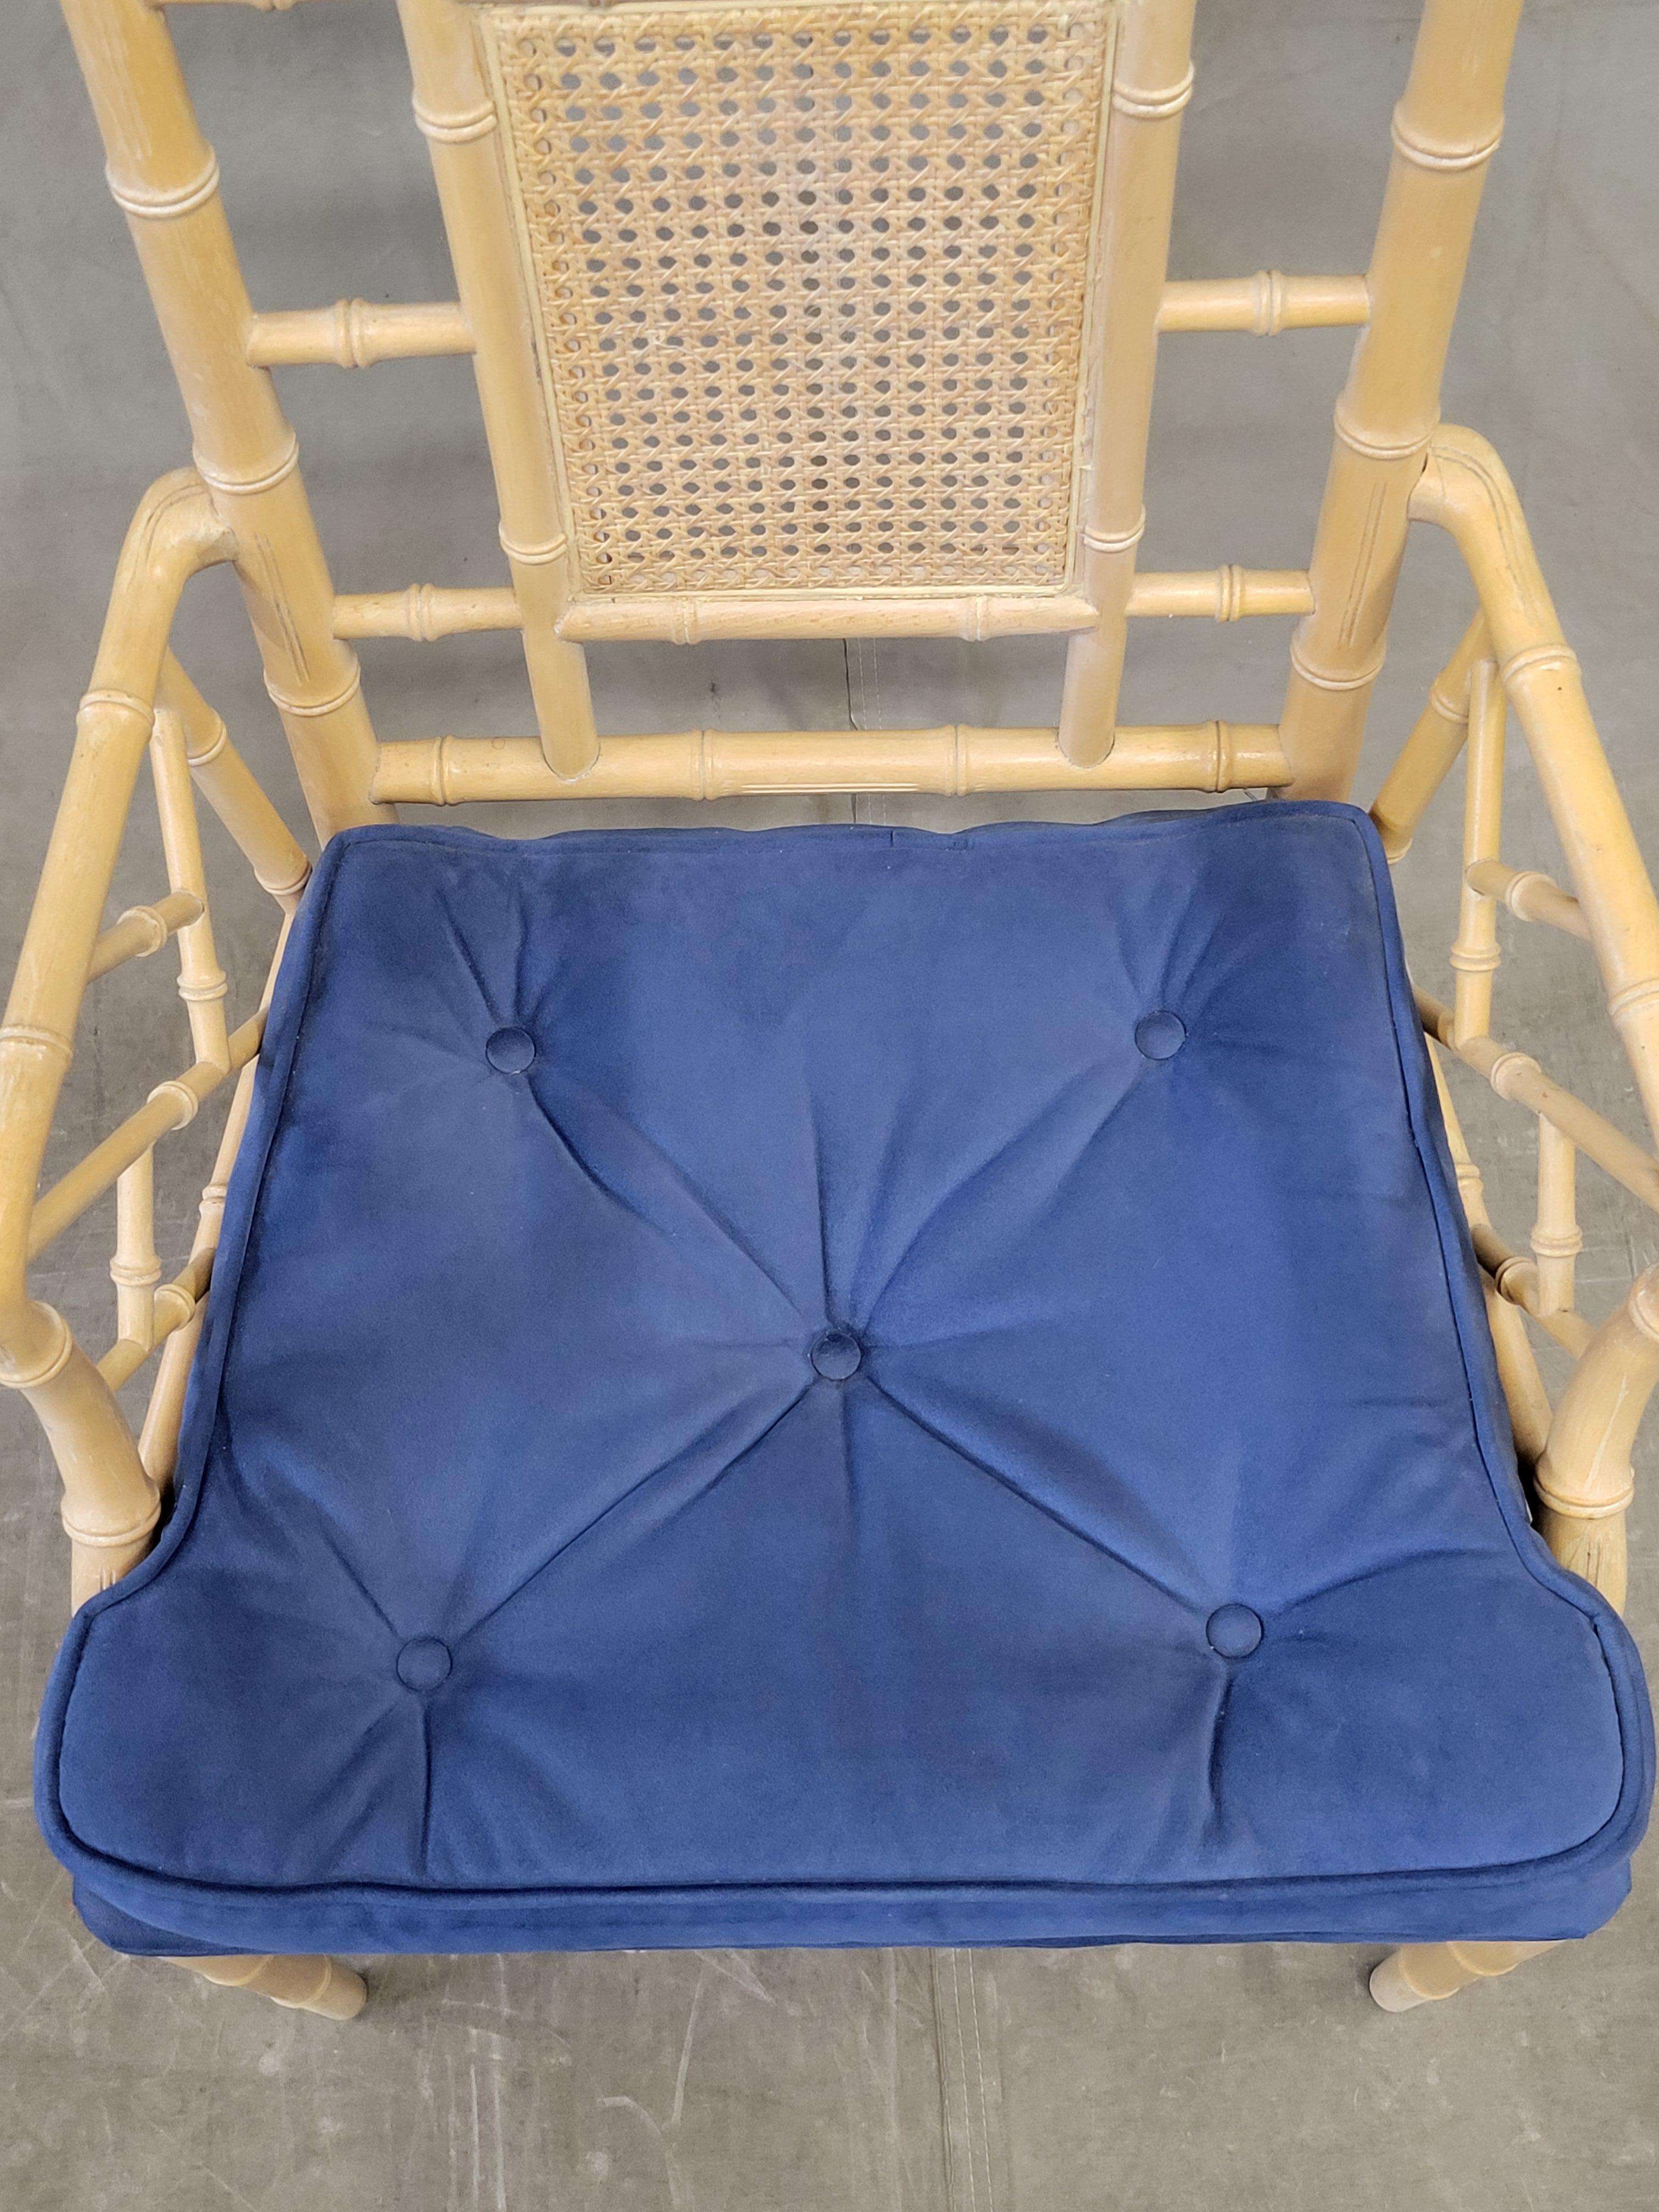 Vintage Faux Bamboo Chairs With Blue Cushions - a Pair For Sale 1